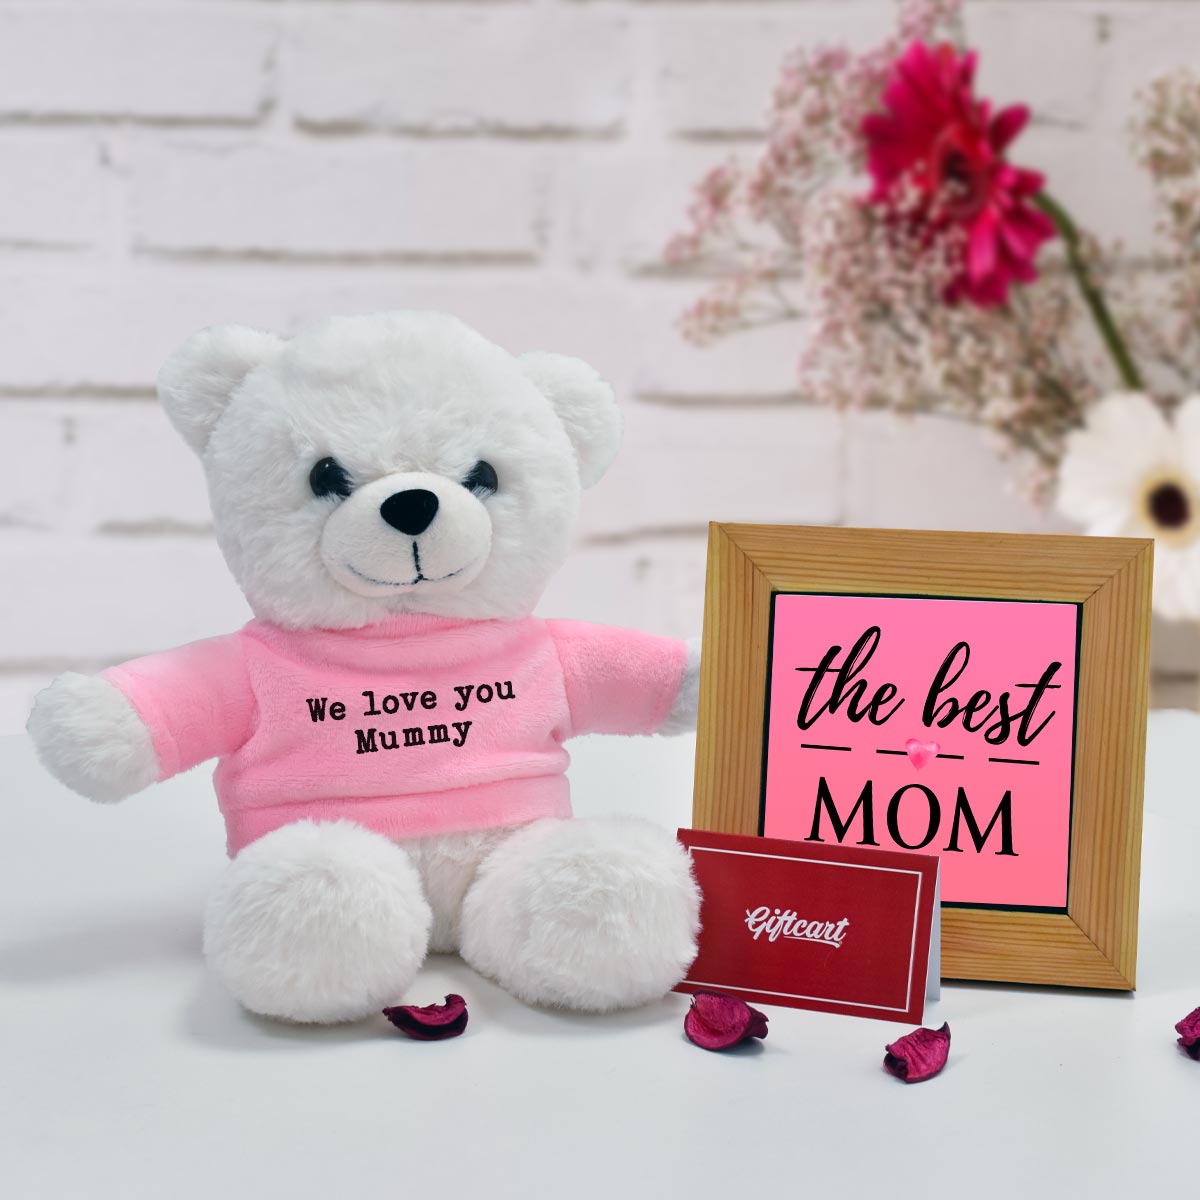 We Love you Mommy Teddy and Table Top with Greeting Card Hamper-2